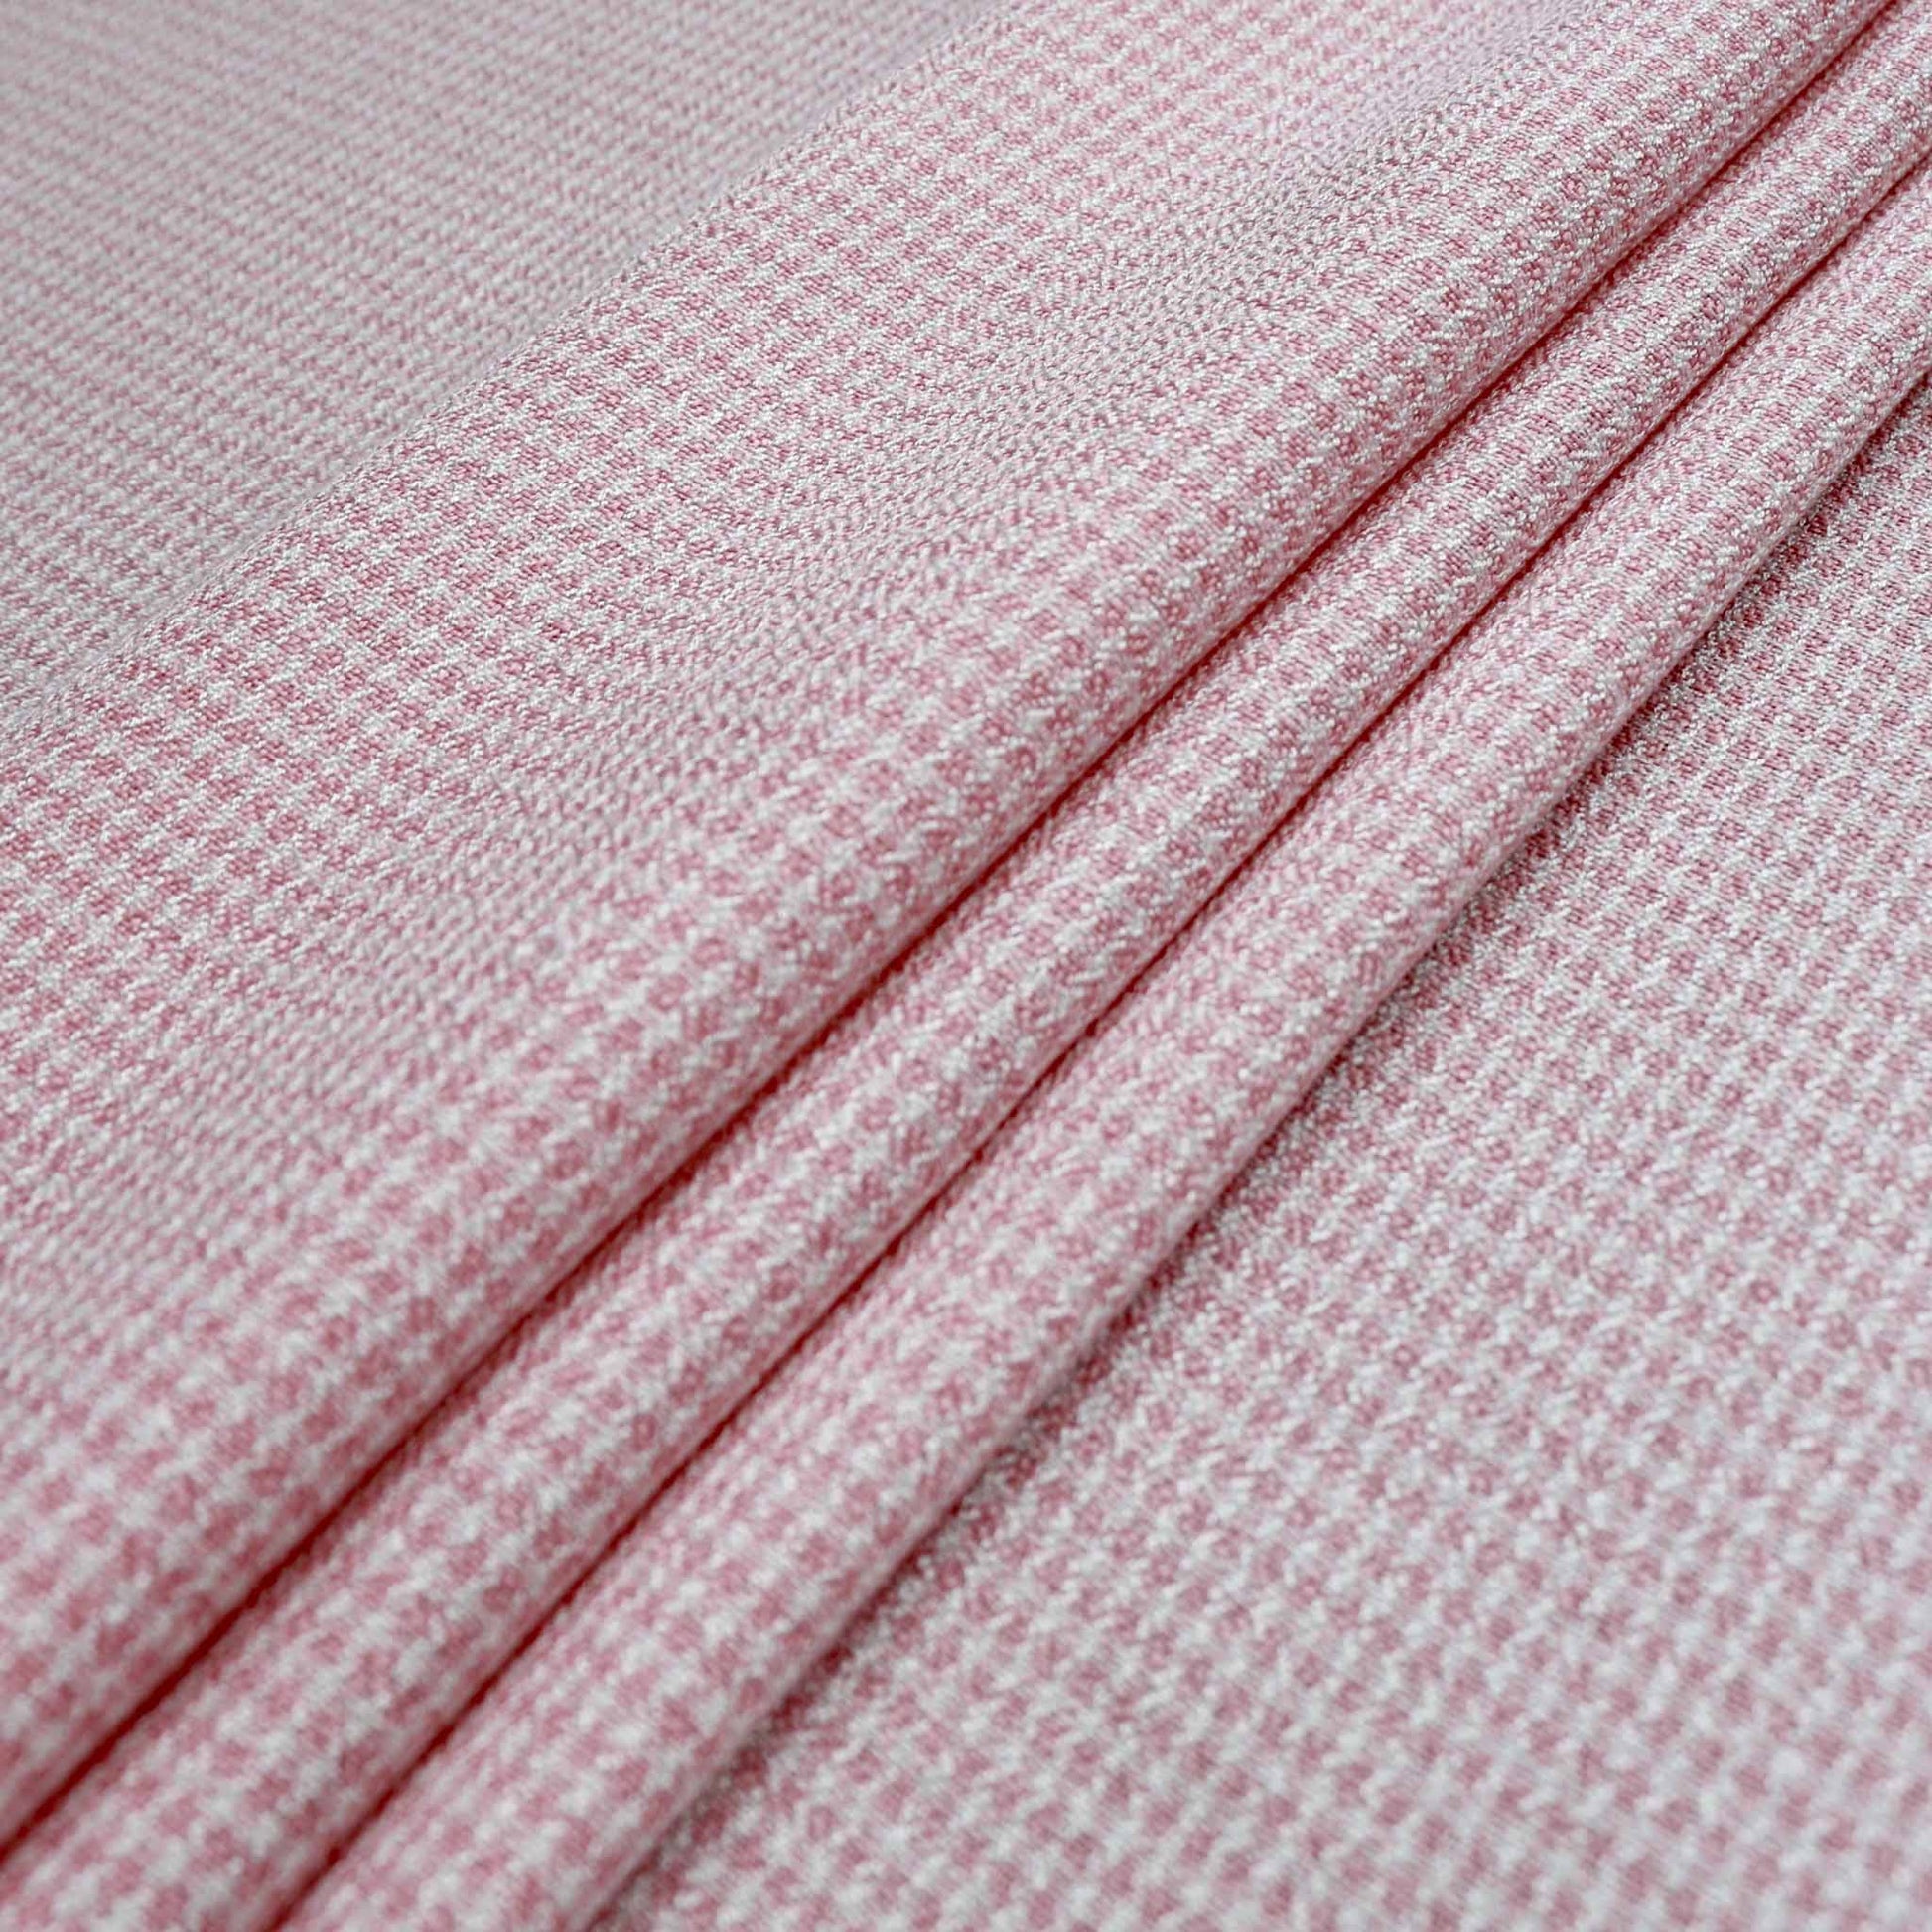 viscose crepe dressmaking fabric with small pink and white check pattern